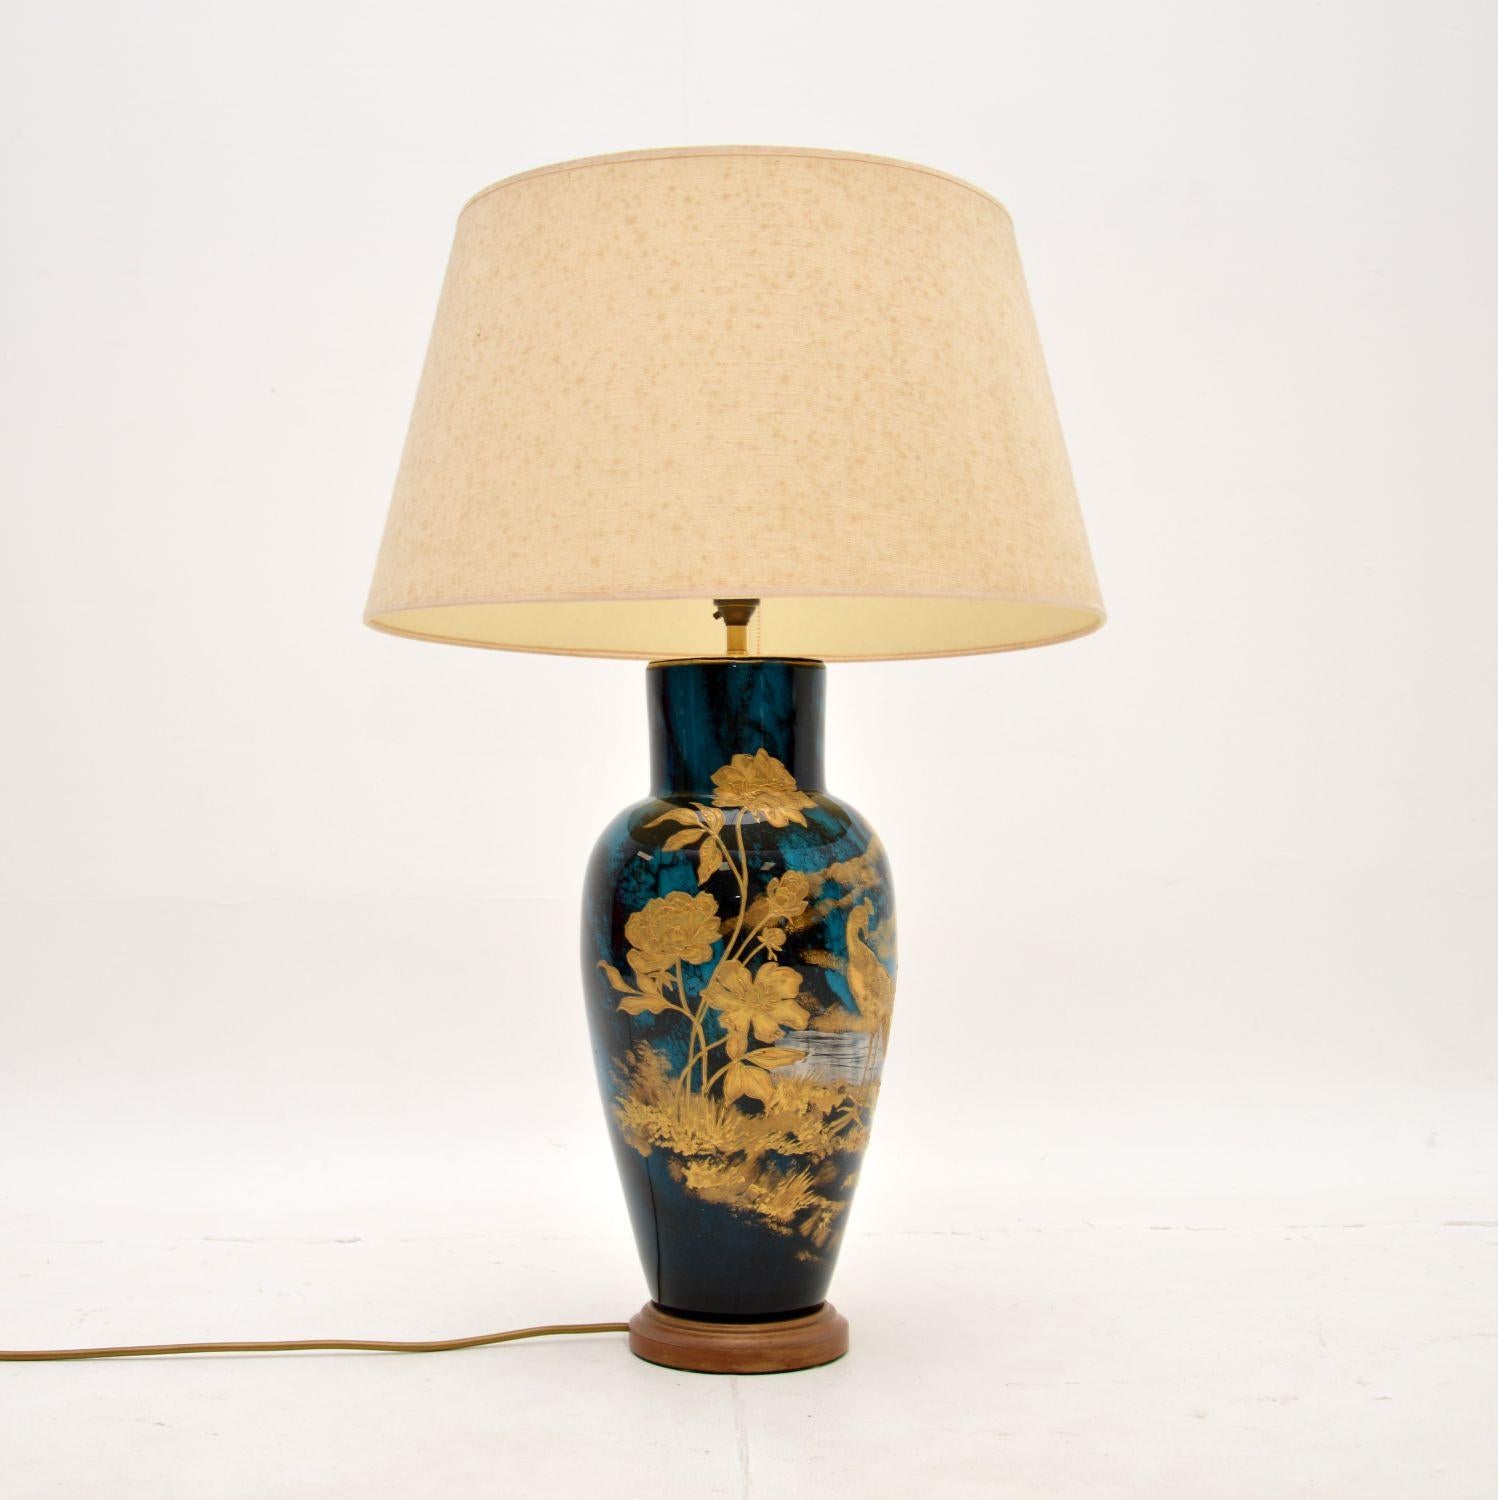 An absolutely gorgeous antique oriental style ceramic table lamp. This was likely made in England, it dates from around the 1950-60’s.

The quality is outstanding, this has incredibly beautiful lacquered decorations, they seem to be layered and have